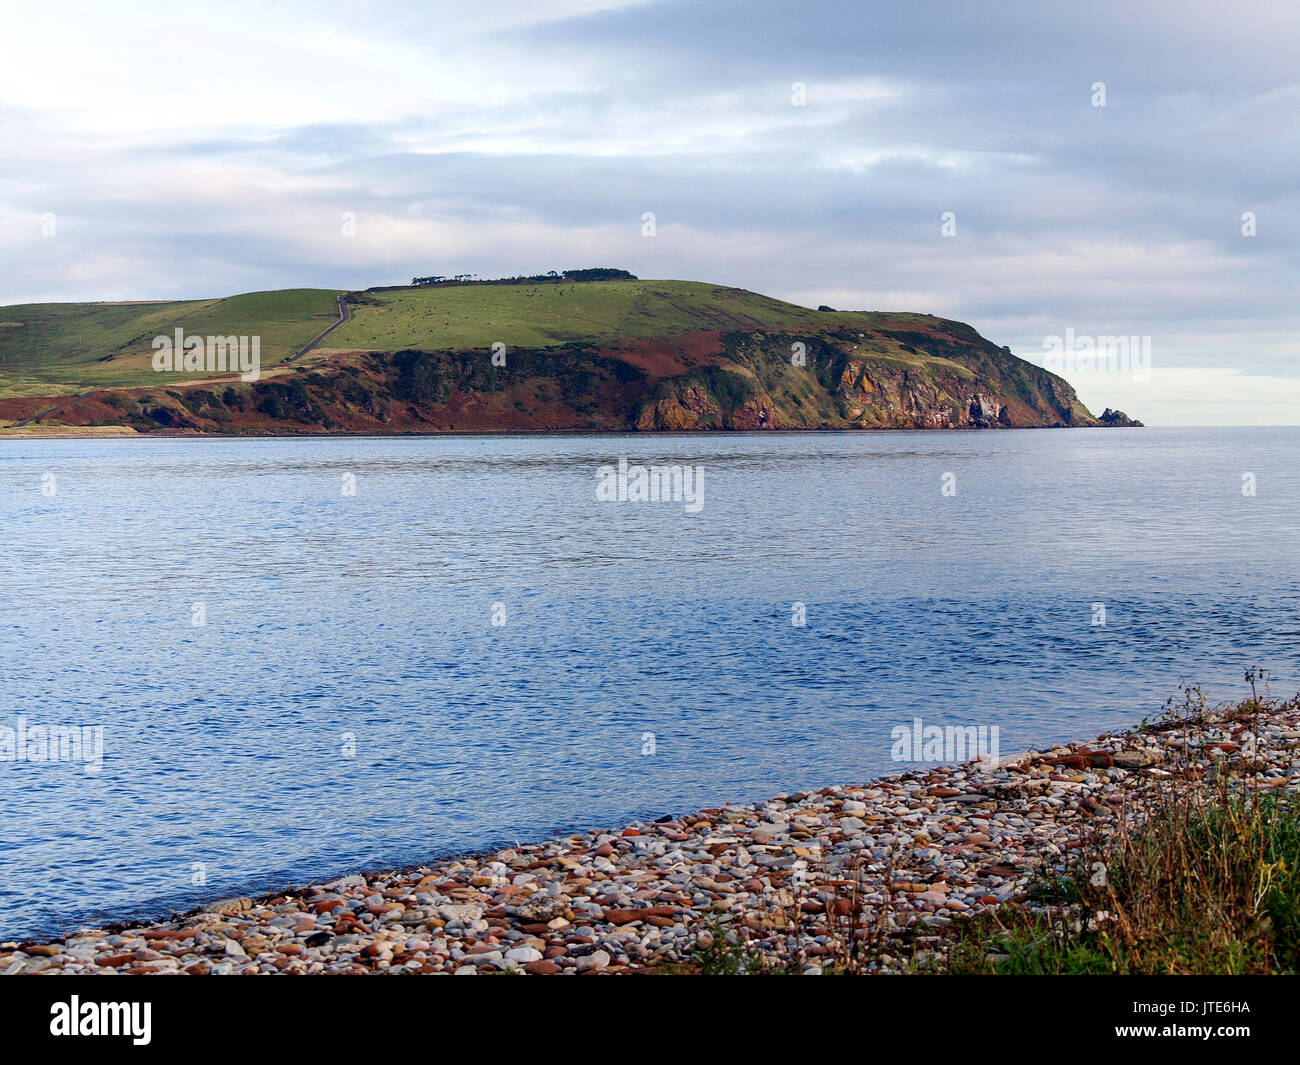 Scotland, Highlands, Sea, Green Mountain Top, Scottish Landscape, Pebbled Beach, Rock Face, Cliff, Nature, Fields, Weeds, Clear Waters, Scenery Stock Photo